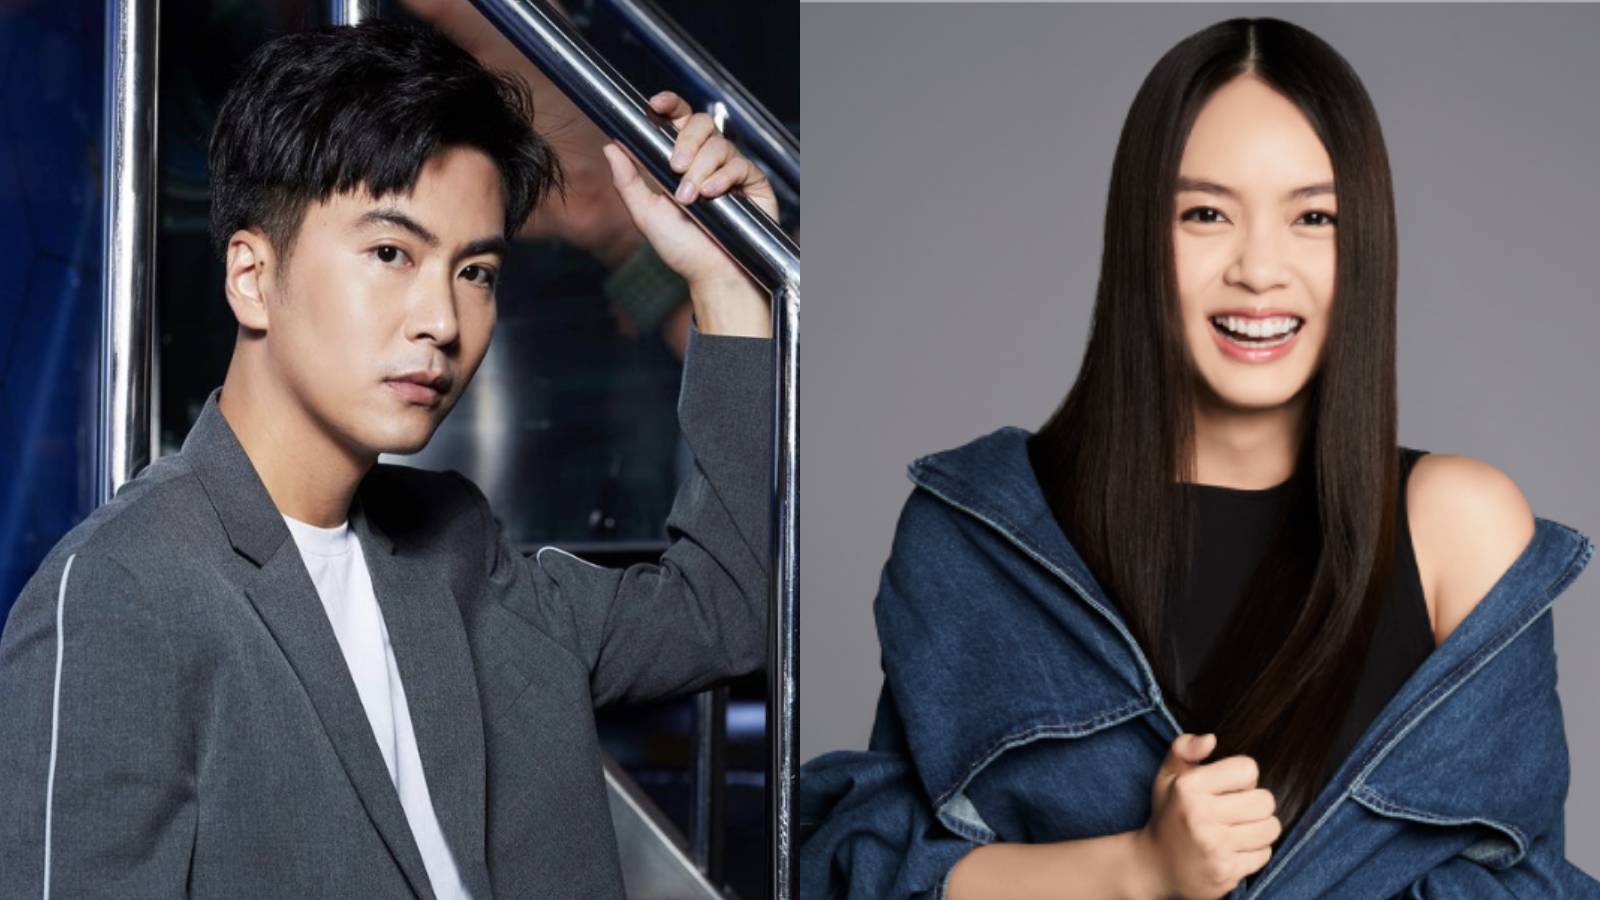 Chantalle Ng Wins Best Actress, Xu Bin Wins Best Actor, And Our Other Star Awards 2022 Predictions